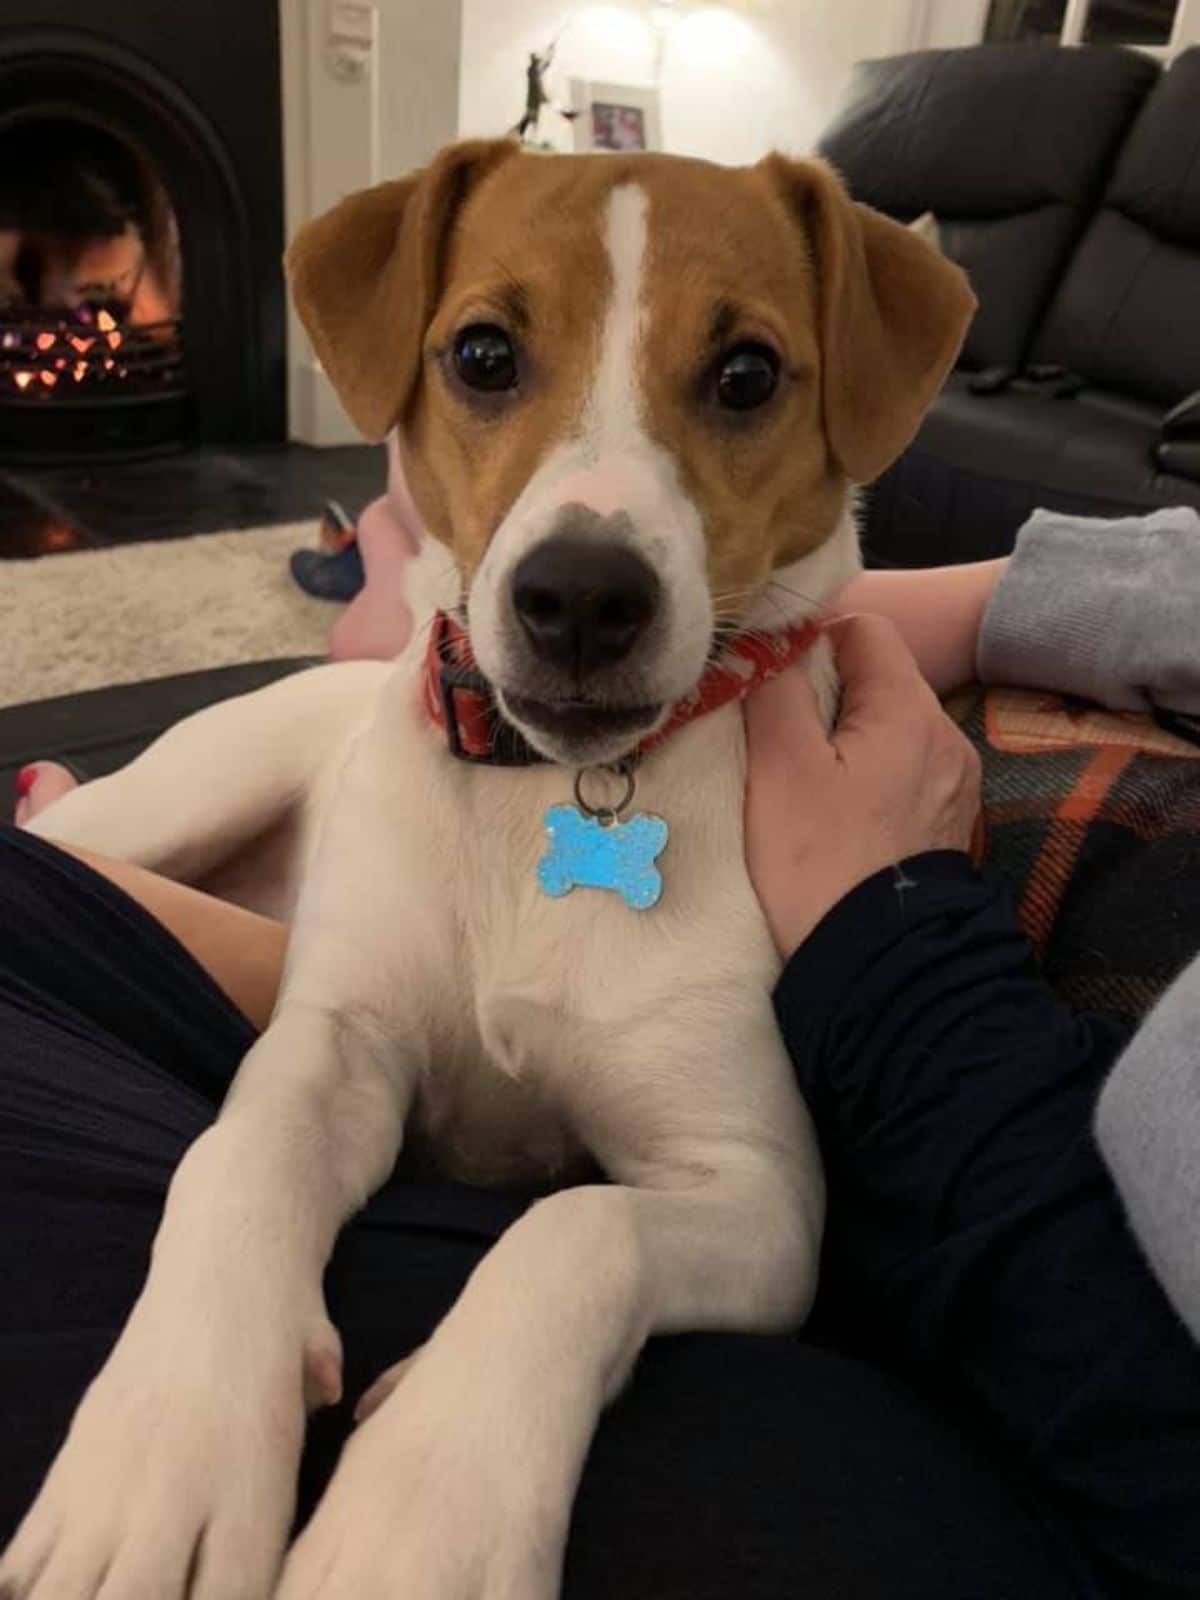 brown and white puppy in a red collar laying on someone's lap